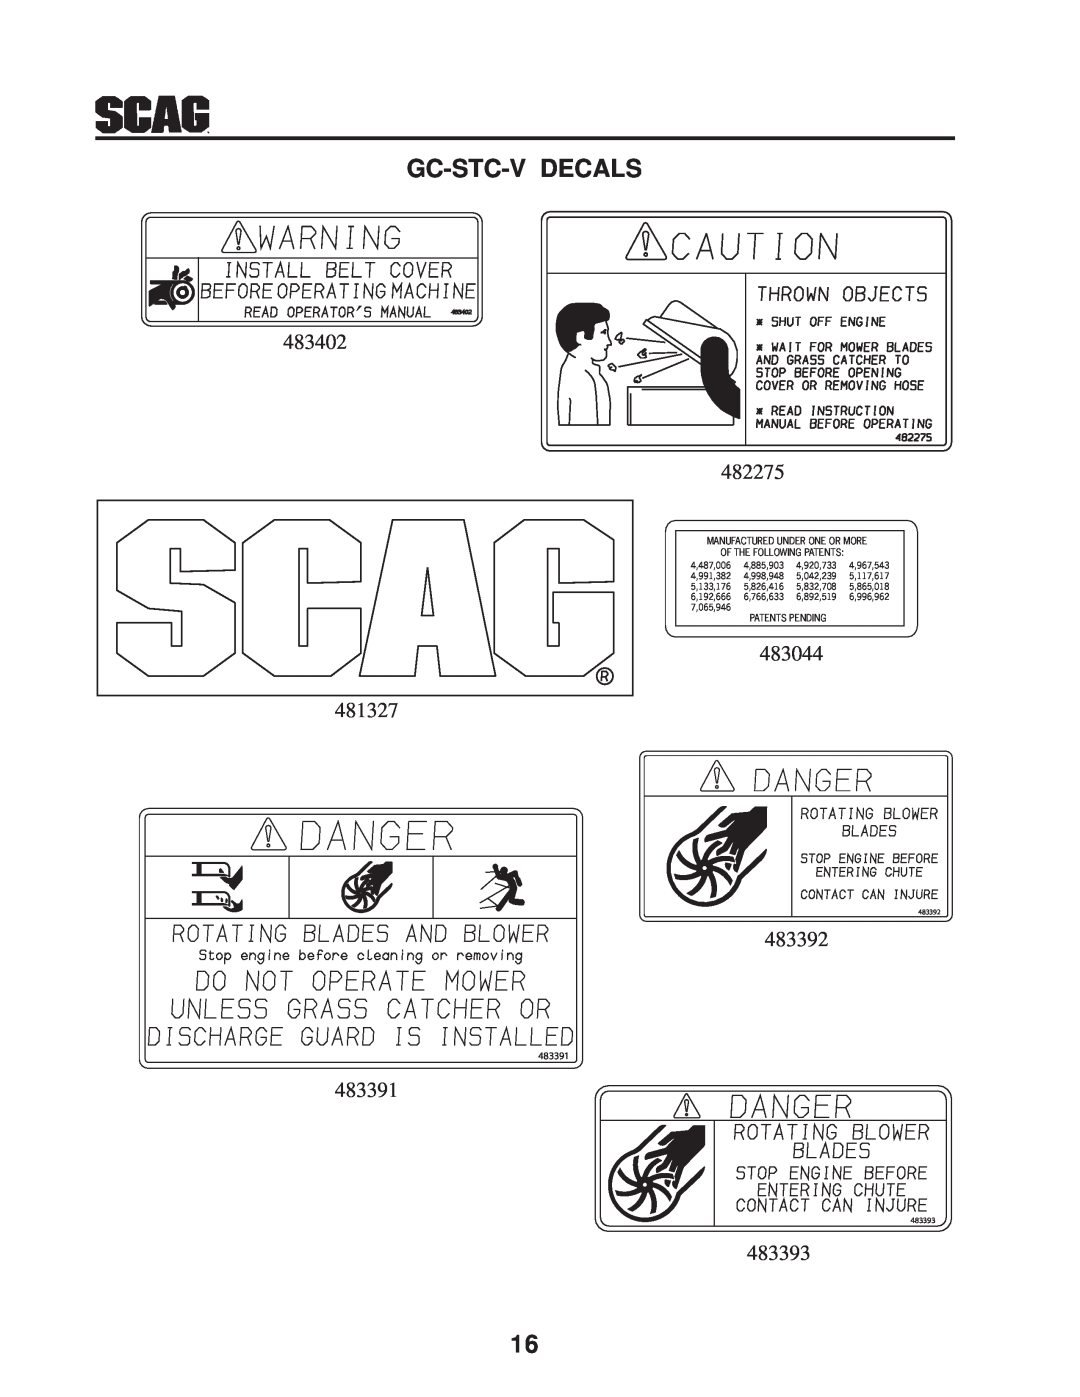 Scag Power Equipment GC-STC-V operating instructions Gc-Stc-V Decals, 483402, 483044, 483392, 483391, 483393 